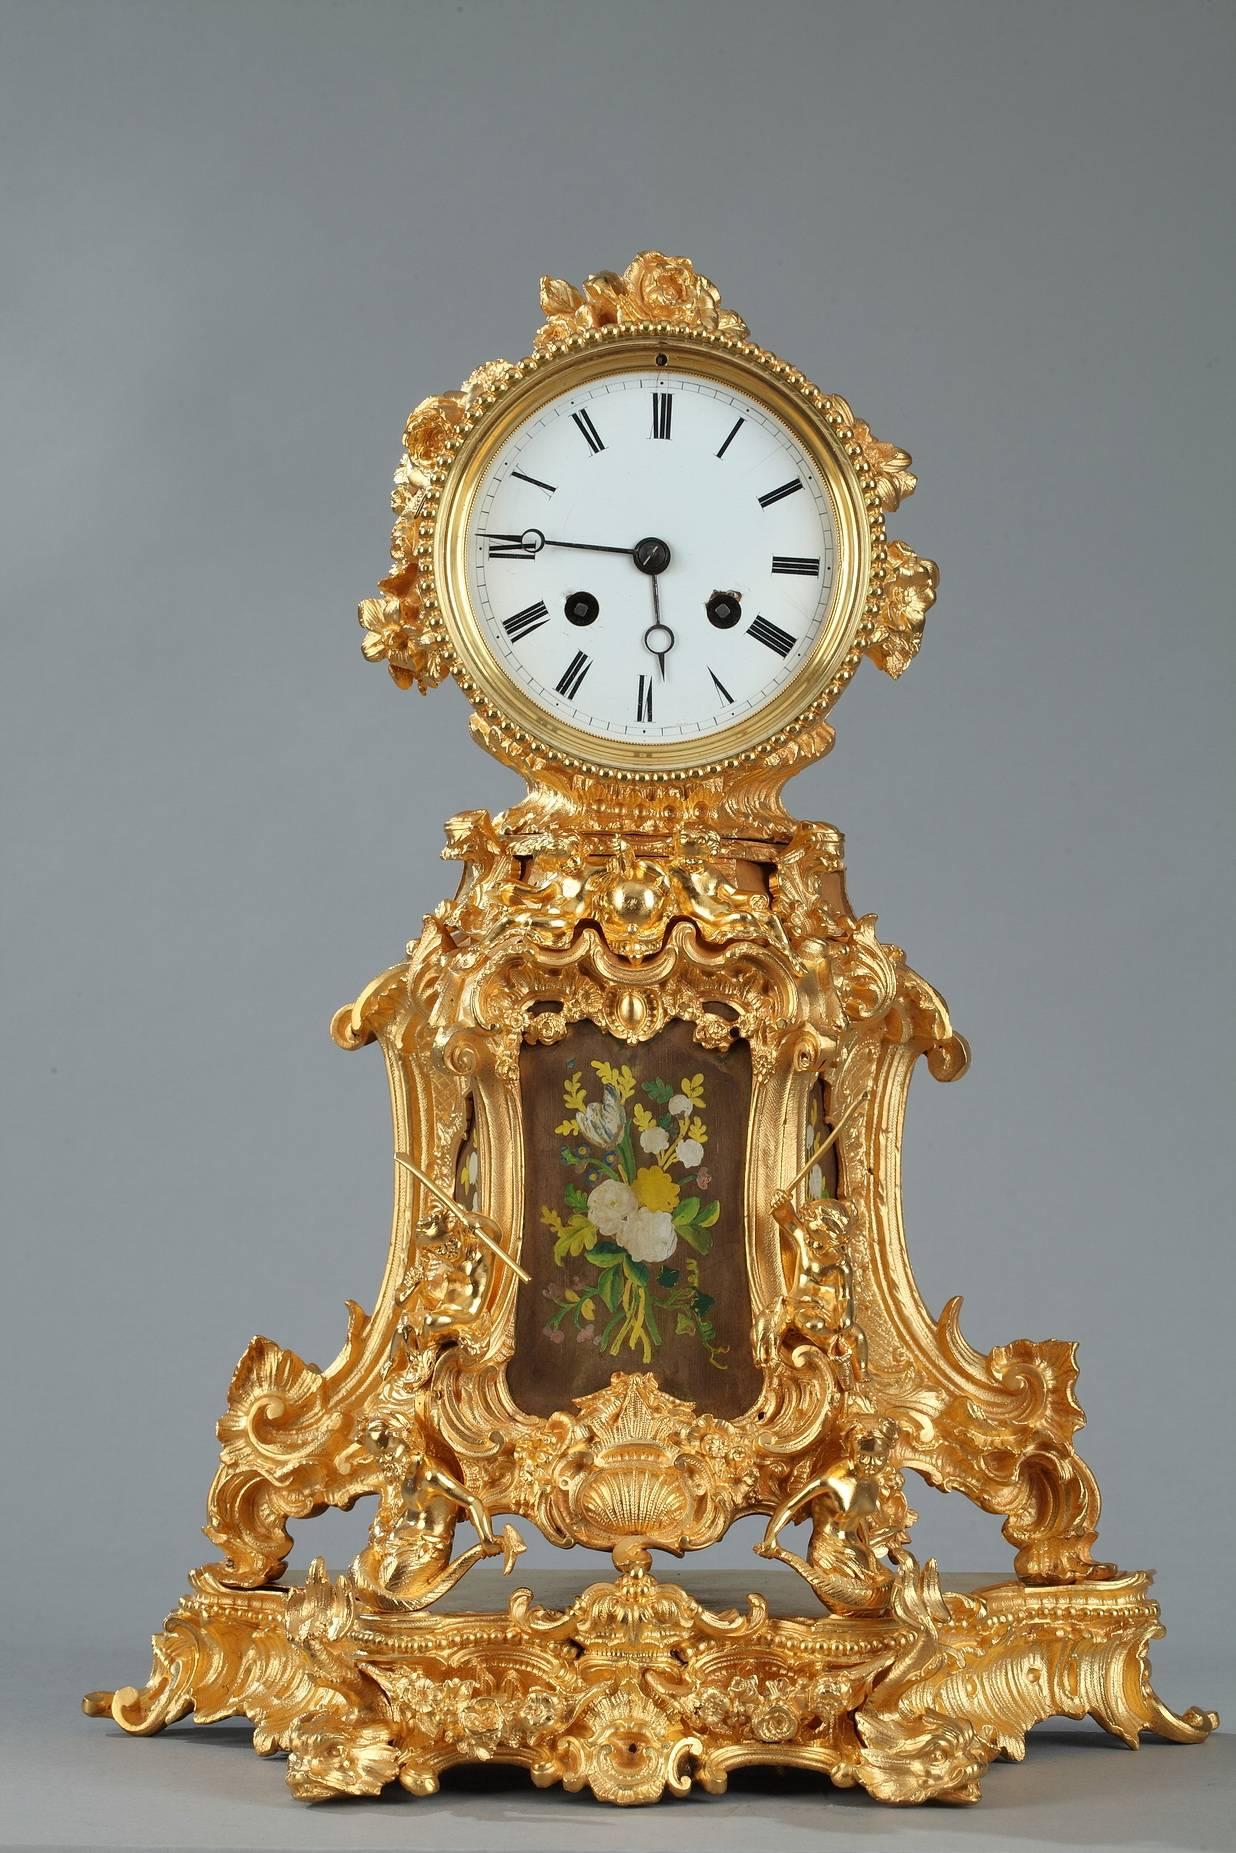 Mantel clock in gilt and sculpted bronze featuring abundant Rocaille motifs such as rinceaux, shells, distressed leaves, and scrollwork. Putti engaged in activities such as reading, fishing, or playing music complete the decor that is characteristic